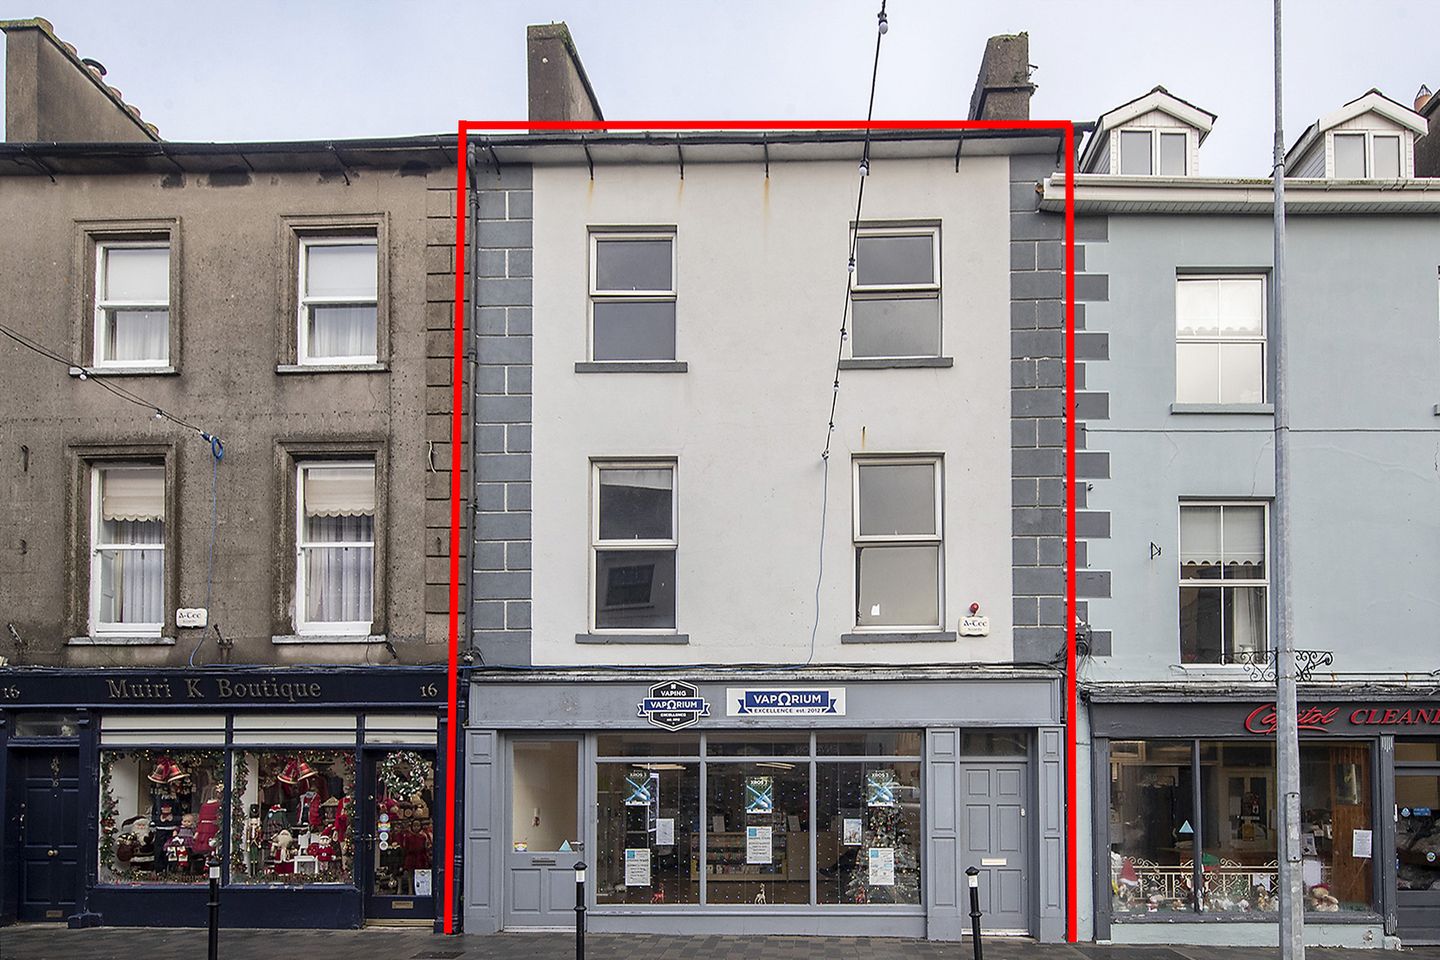 15' O Connell Street, Dungarvan, Dungarvan, Co. Waterford, X35P661